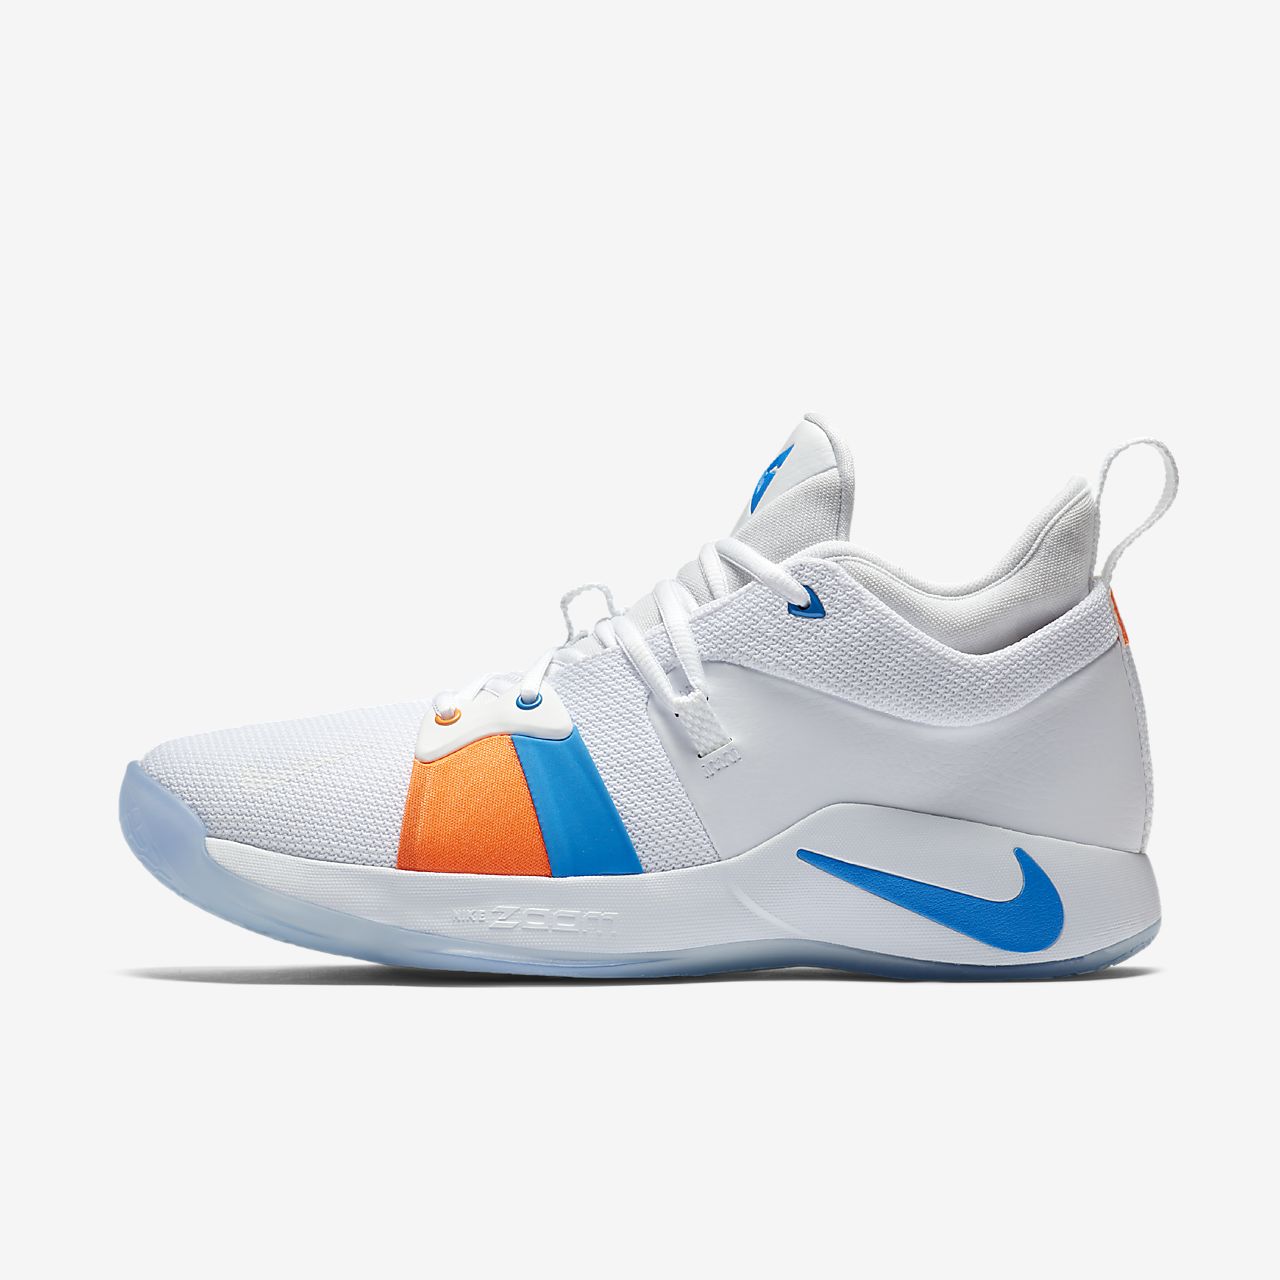 pg 13 shoes 2 Kevin Durant shoes on sale